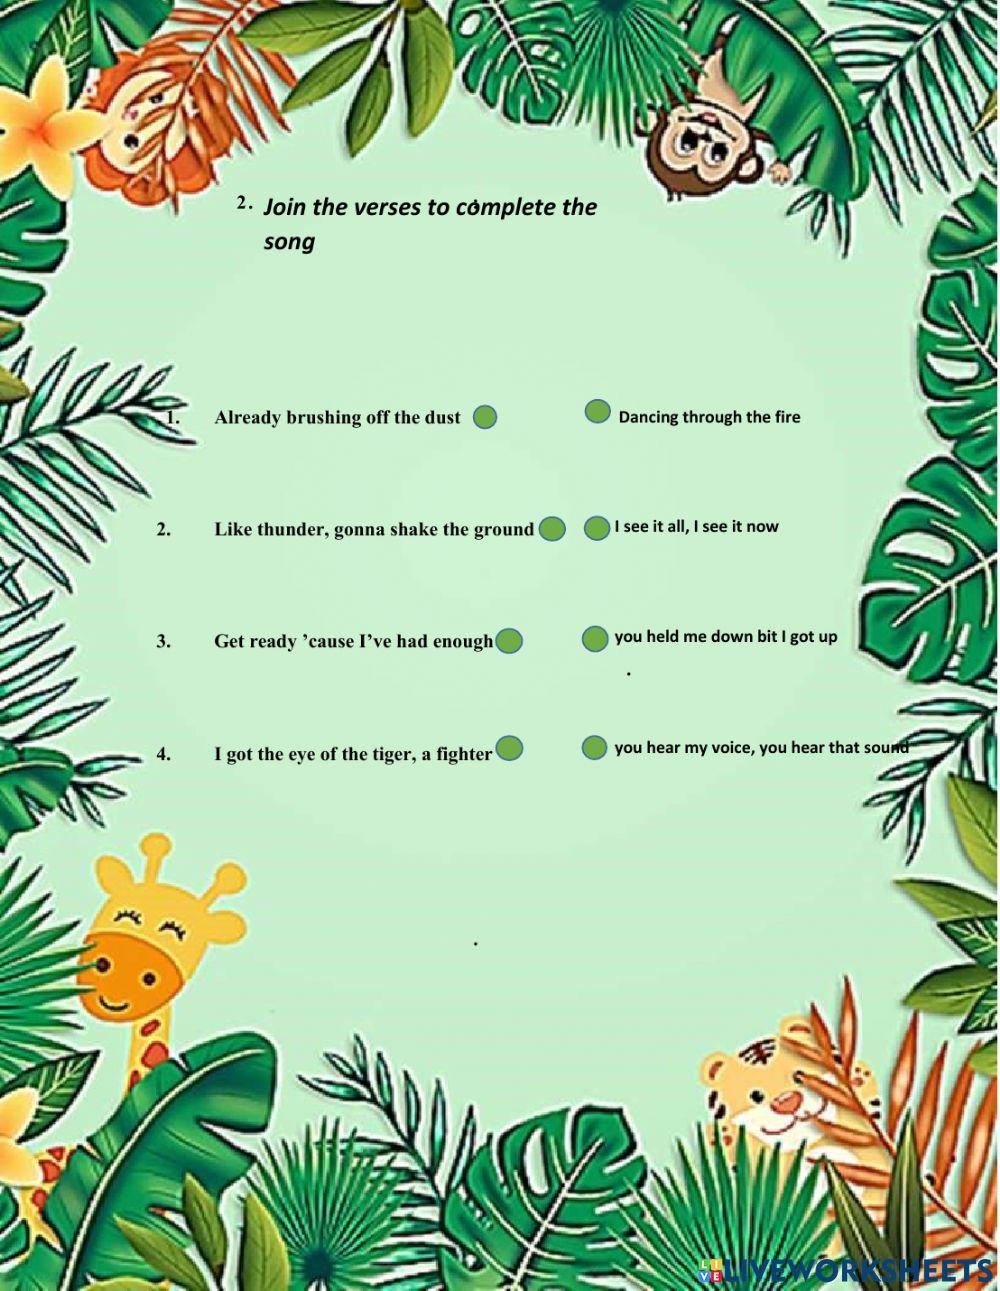 Song Roar Katy Perry - vocabulary practice - ESL worksheet by caiomachado